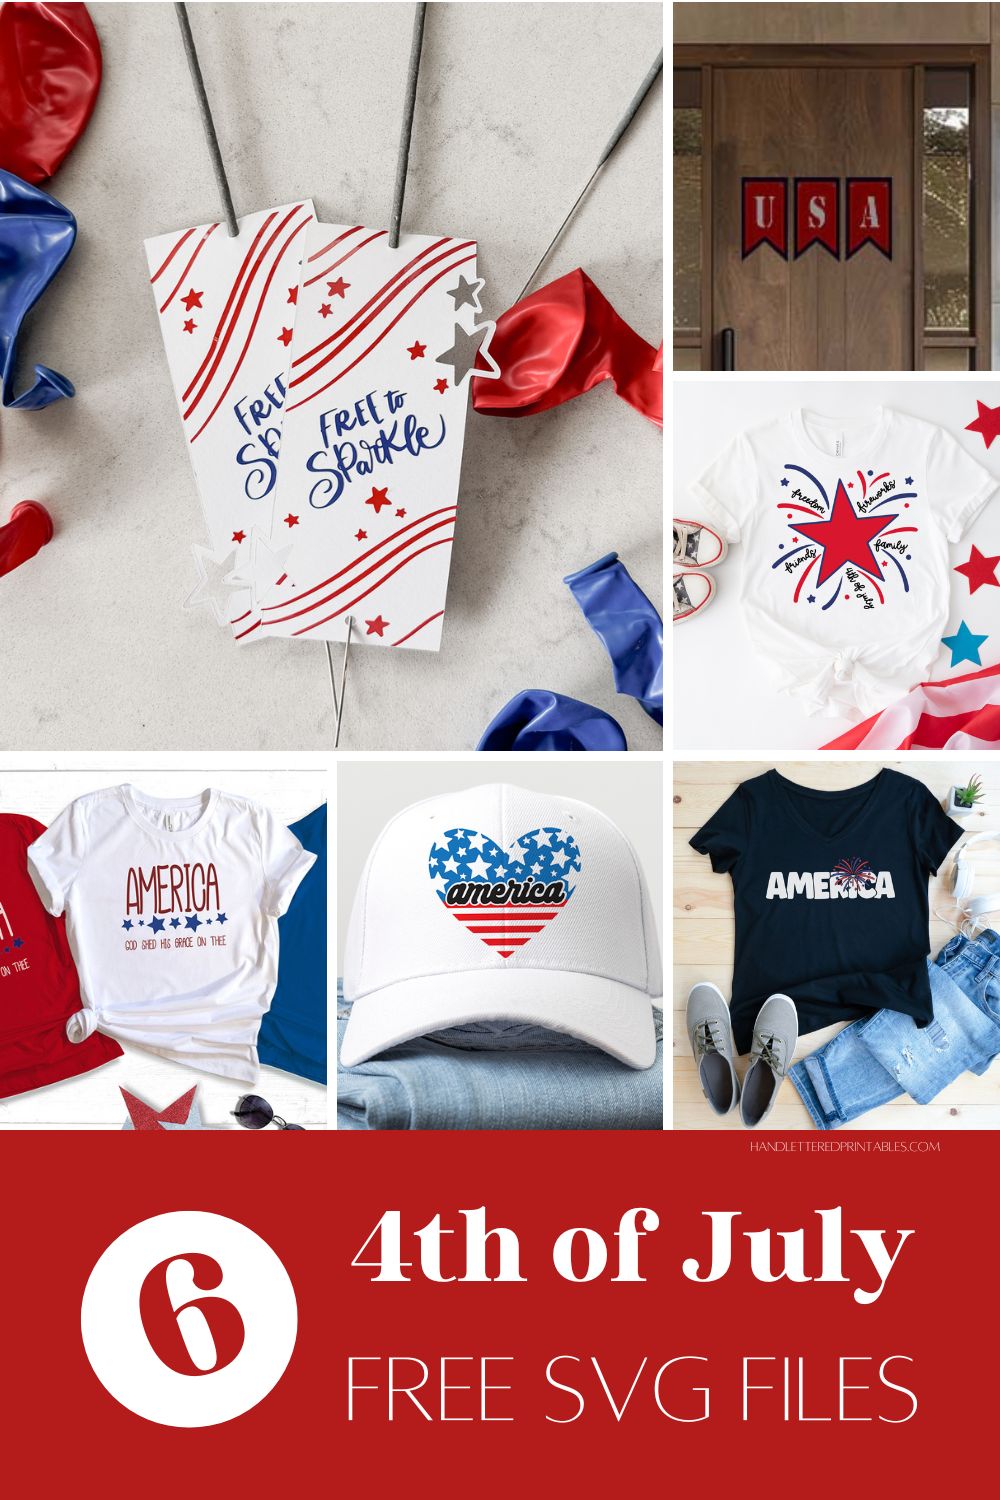 text over reads: 6 free SVG files for the 4th of July! collage of images of DIY projects made with the free SVG files for the fourth of july